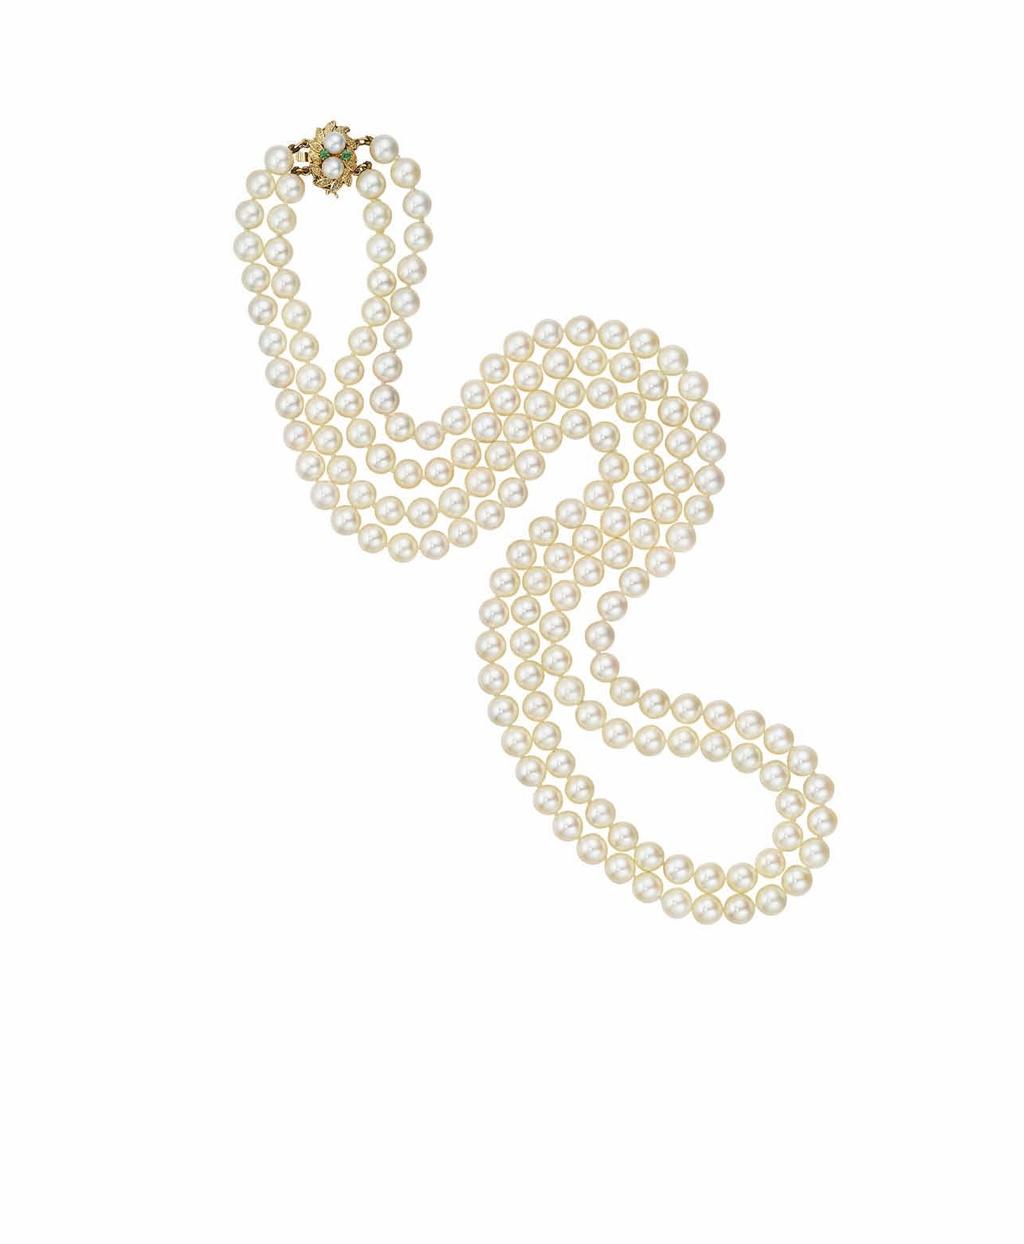 4 5 PROPERTY OF A LADY 4 A Double-Strand Cultured Pearl Necklace Of two strands of cultured pearls, measuring from approximately 6.9 to 6.